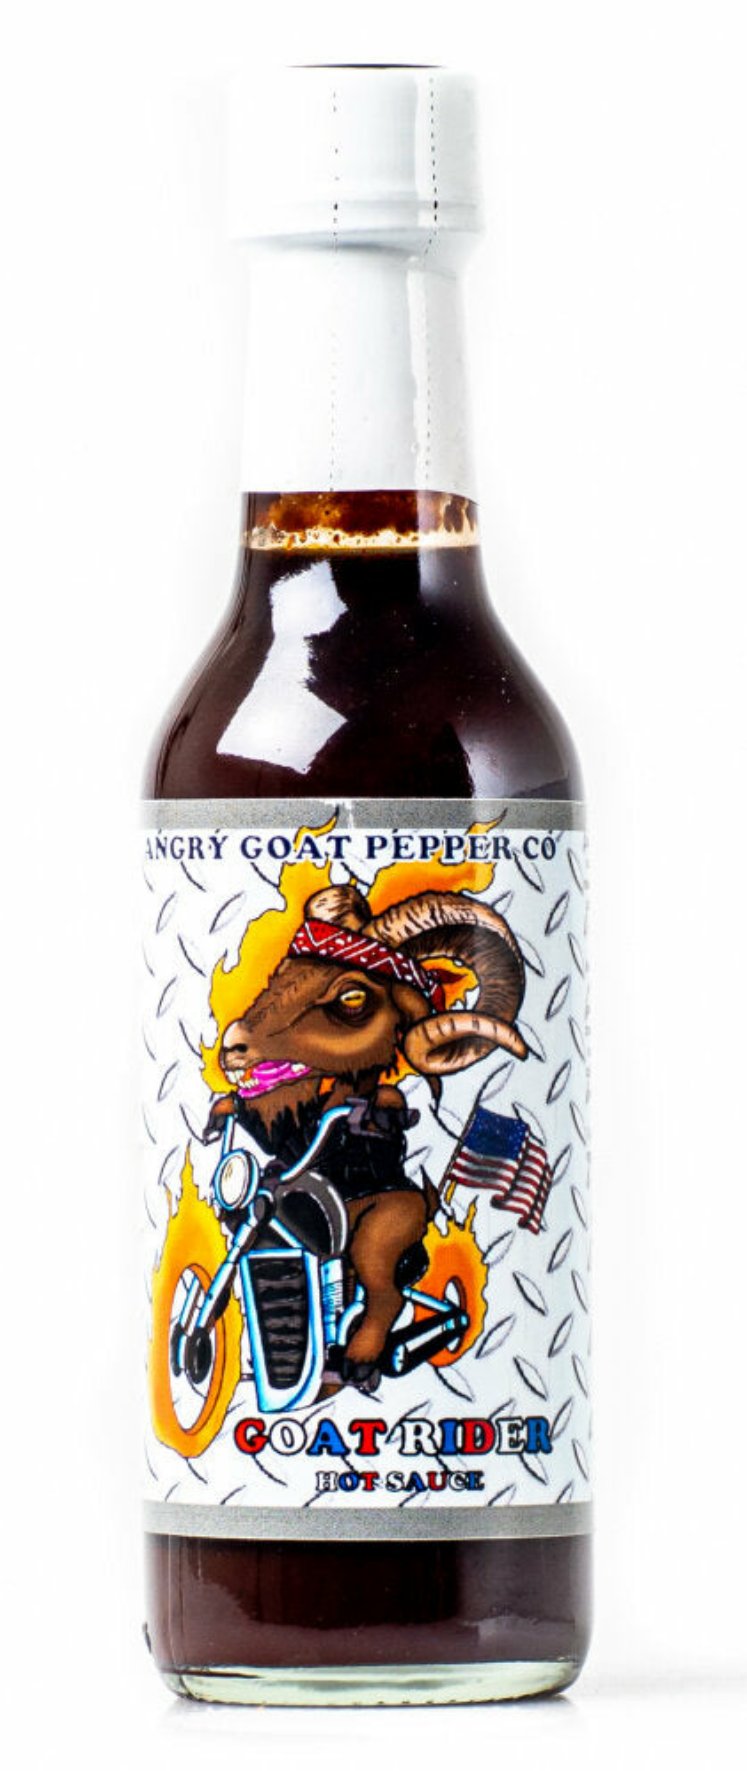 Angry Goat Pepper Co - Goat Rider Hot Sauce